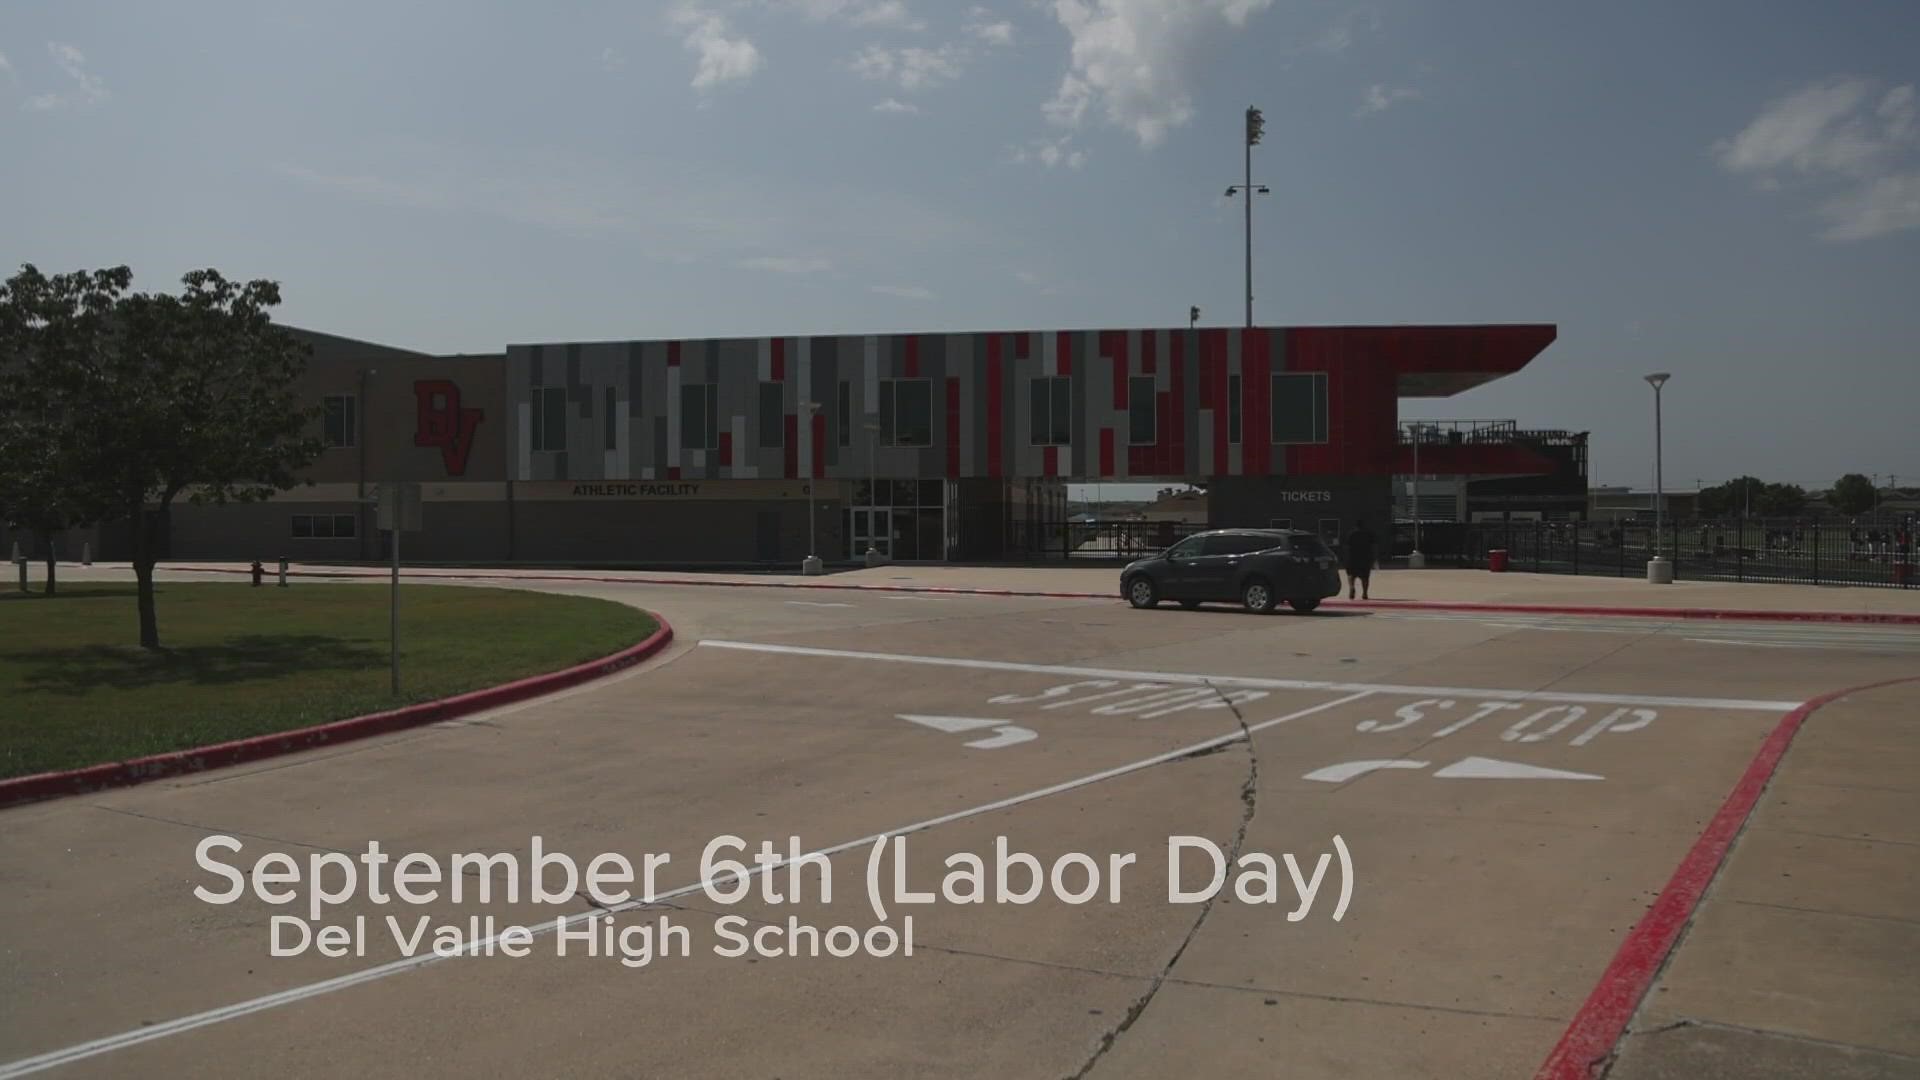 For the second episode, KVUE visited Del Valle High School.